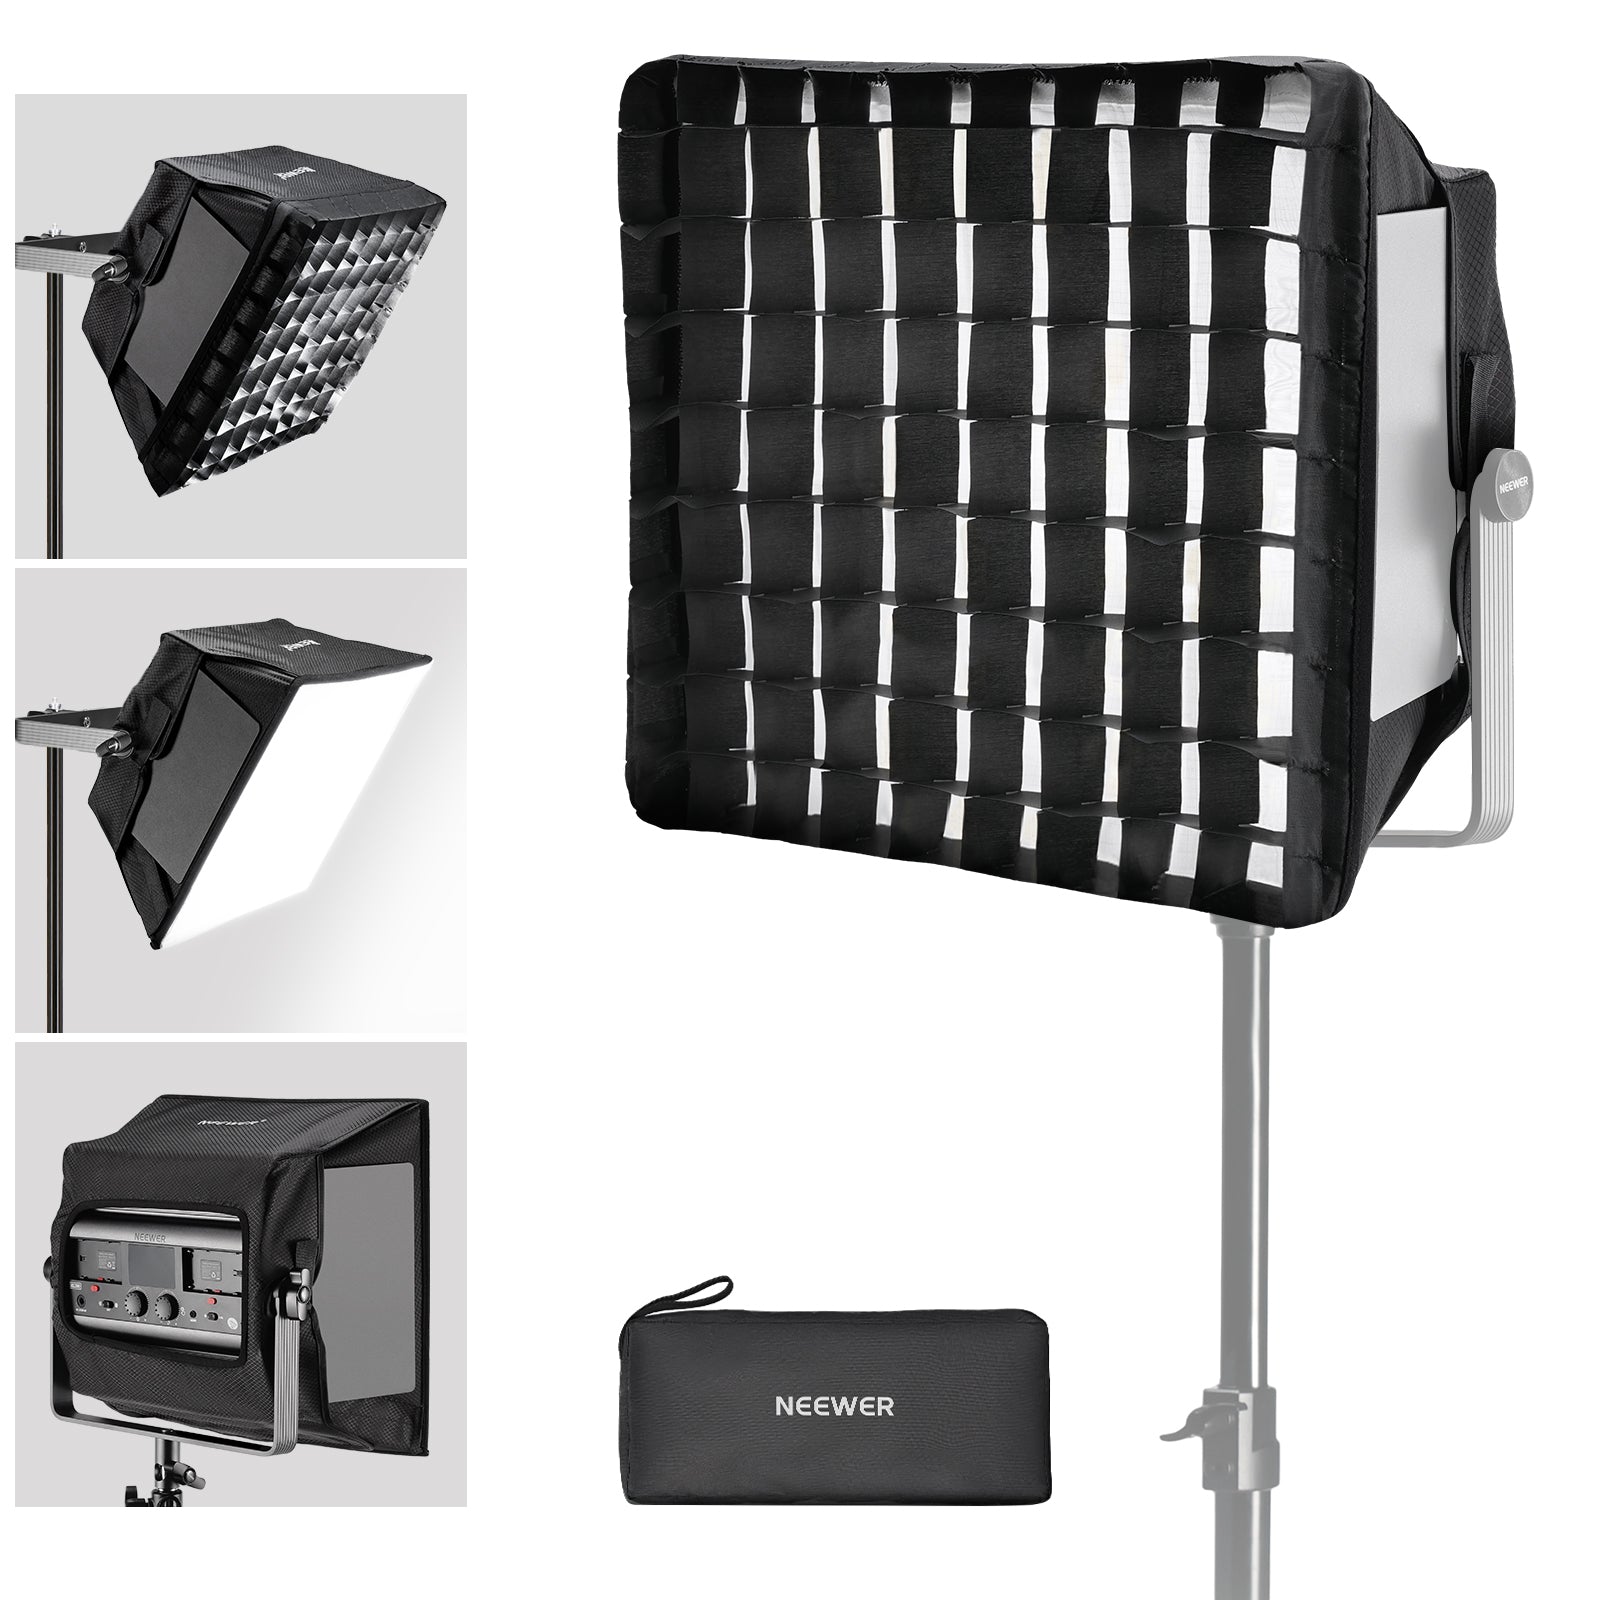 NEEWER NS5S Upgraded Softbox Diffuser For RGB1200